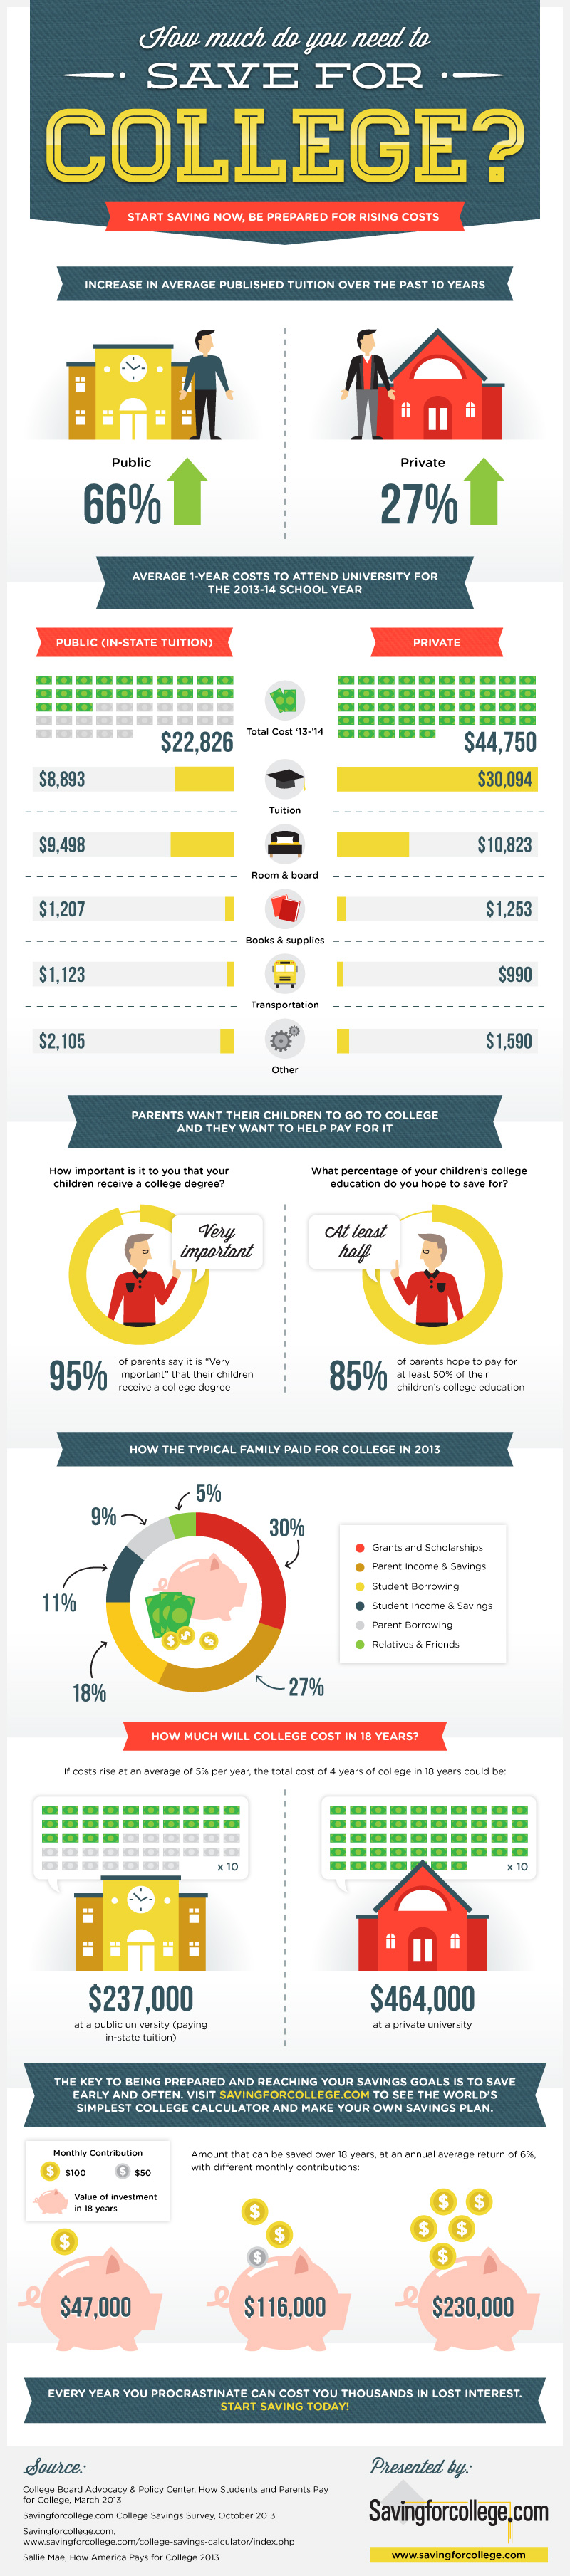 How much do you need to save for college Infographic